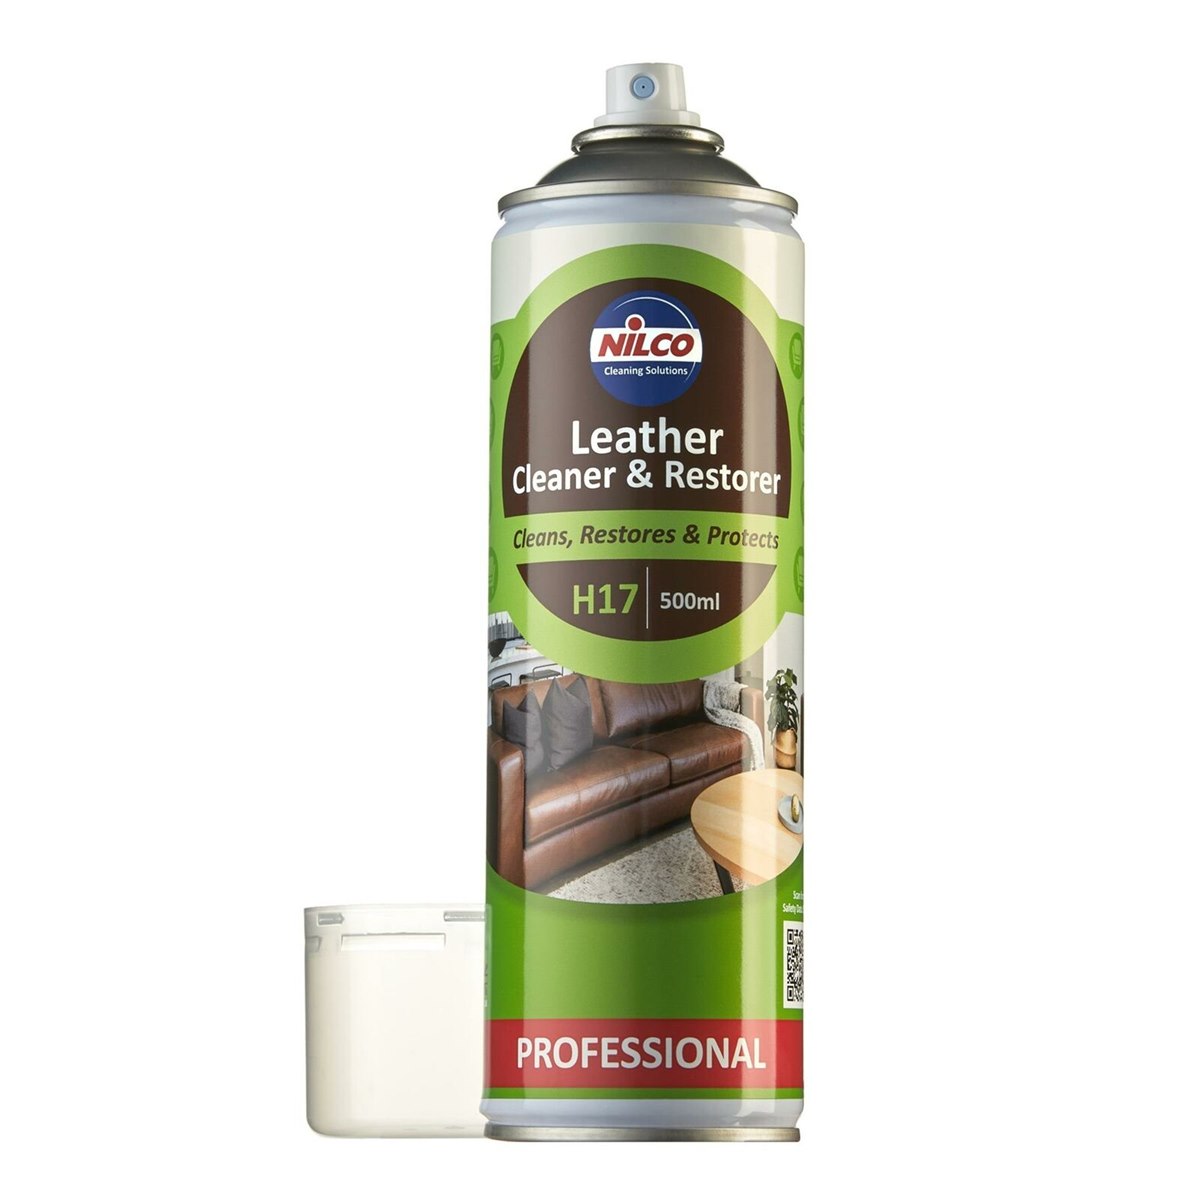 Nilco Leather Cleaner and Restorer